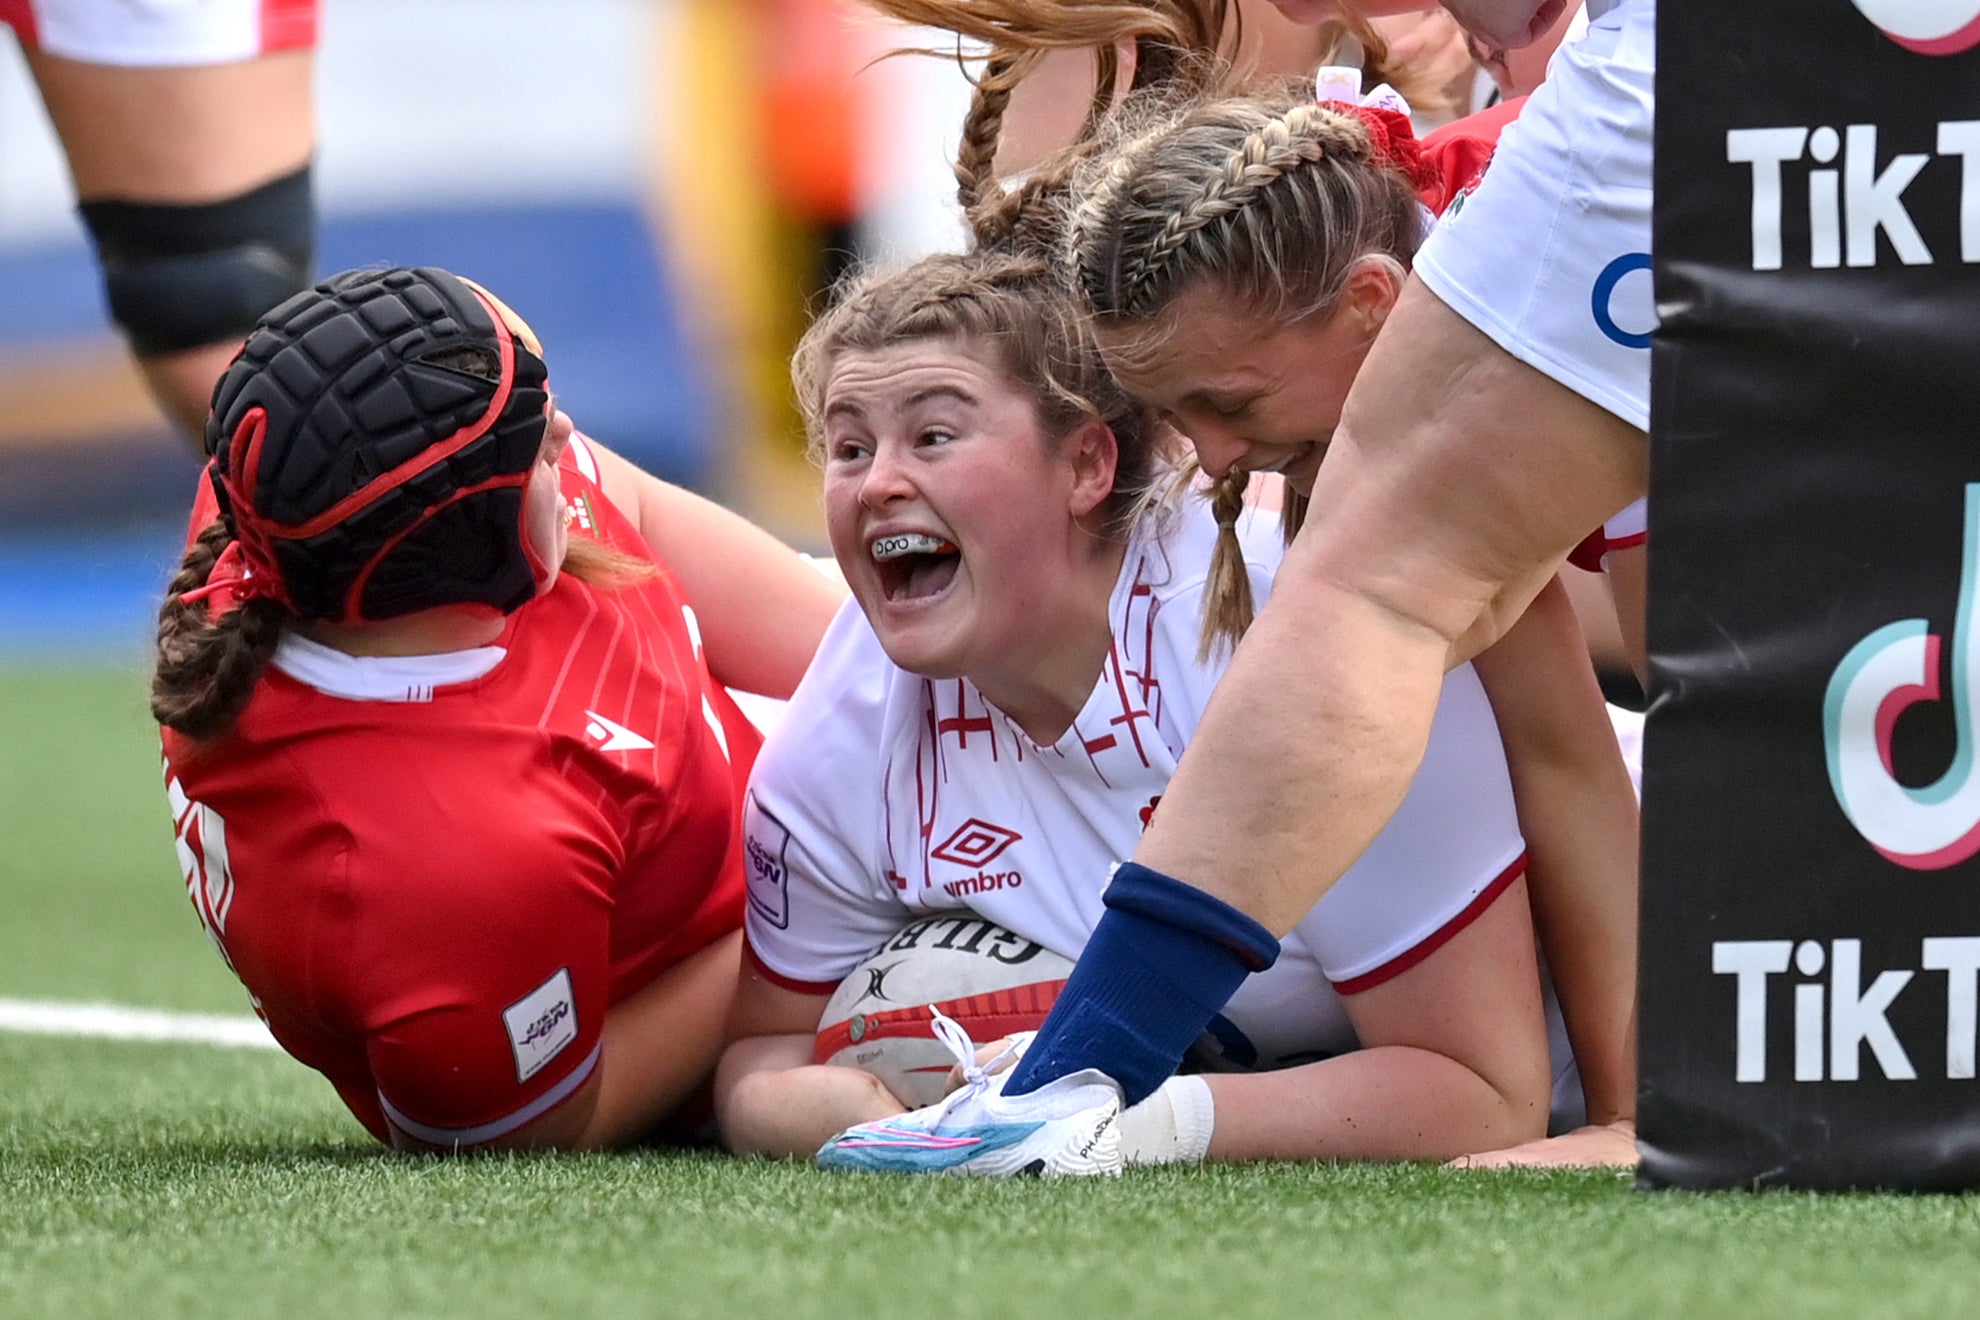 Maud Muir is set to be a key figure for England in this Women’s Six Nations